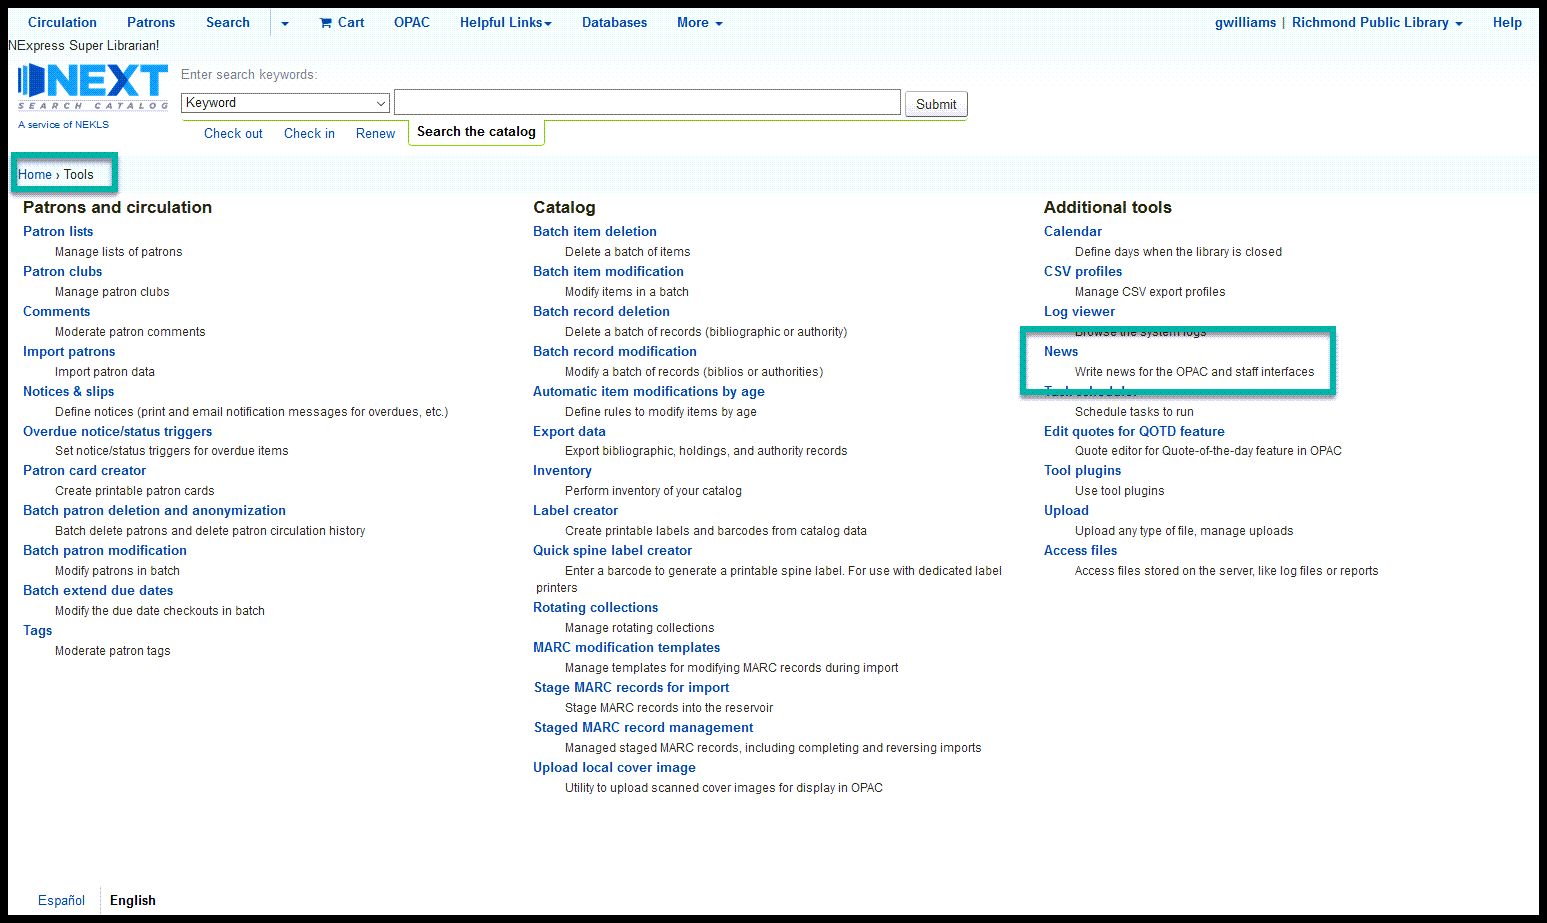 Screenshot of where to find "News" on the tools page